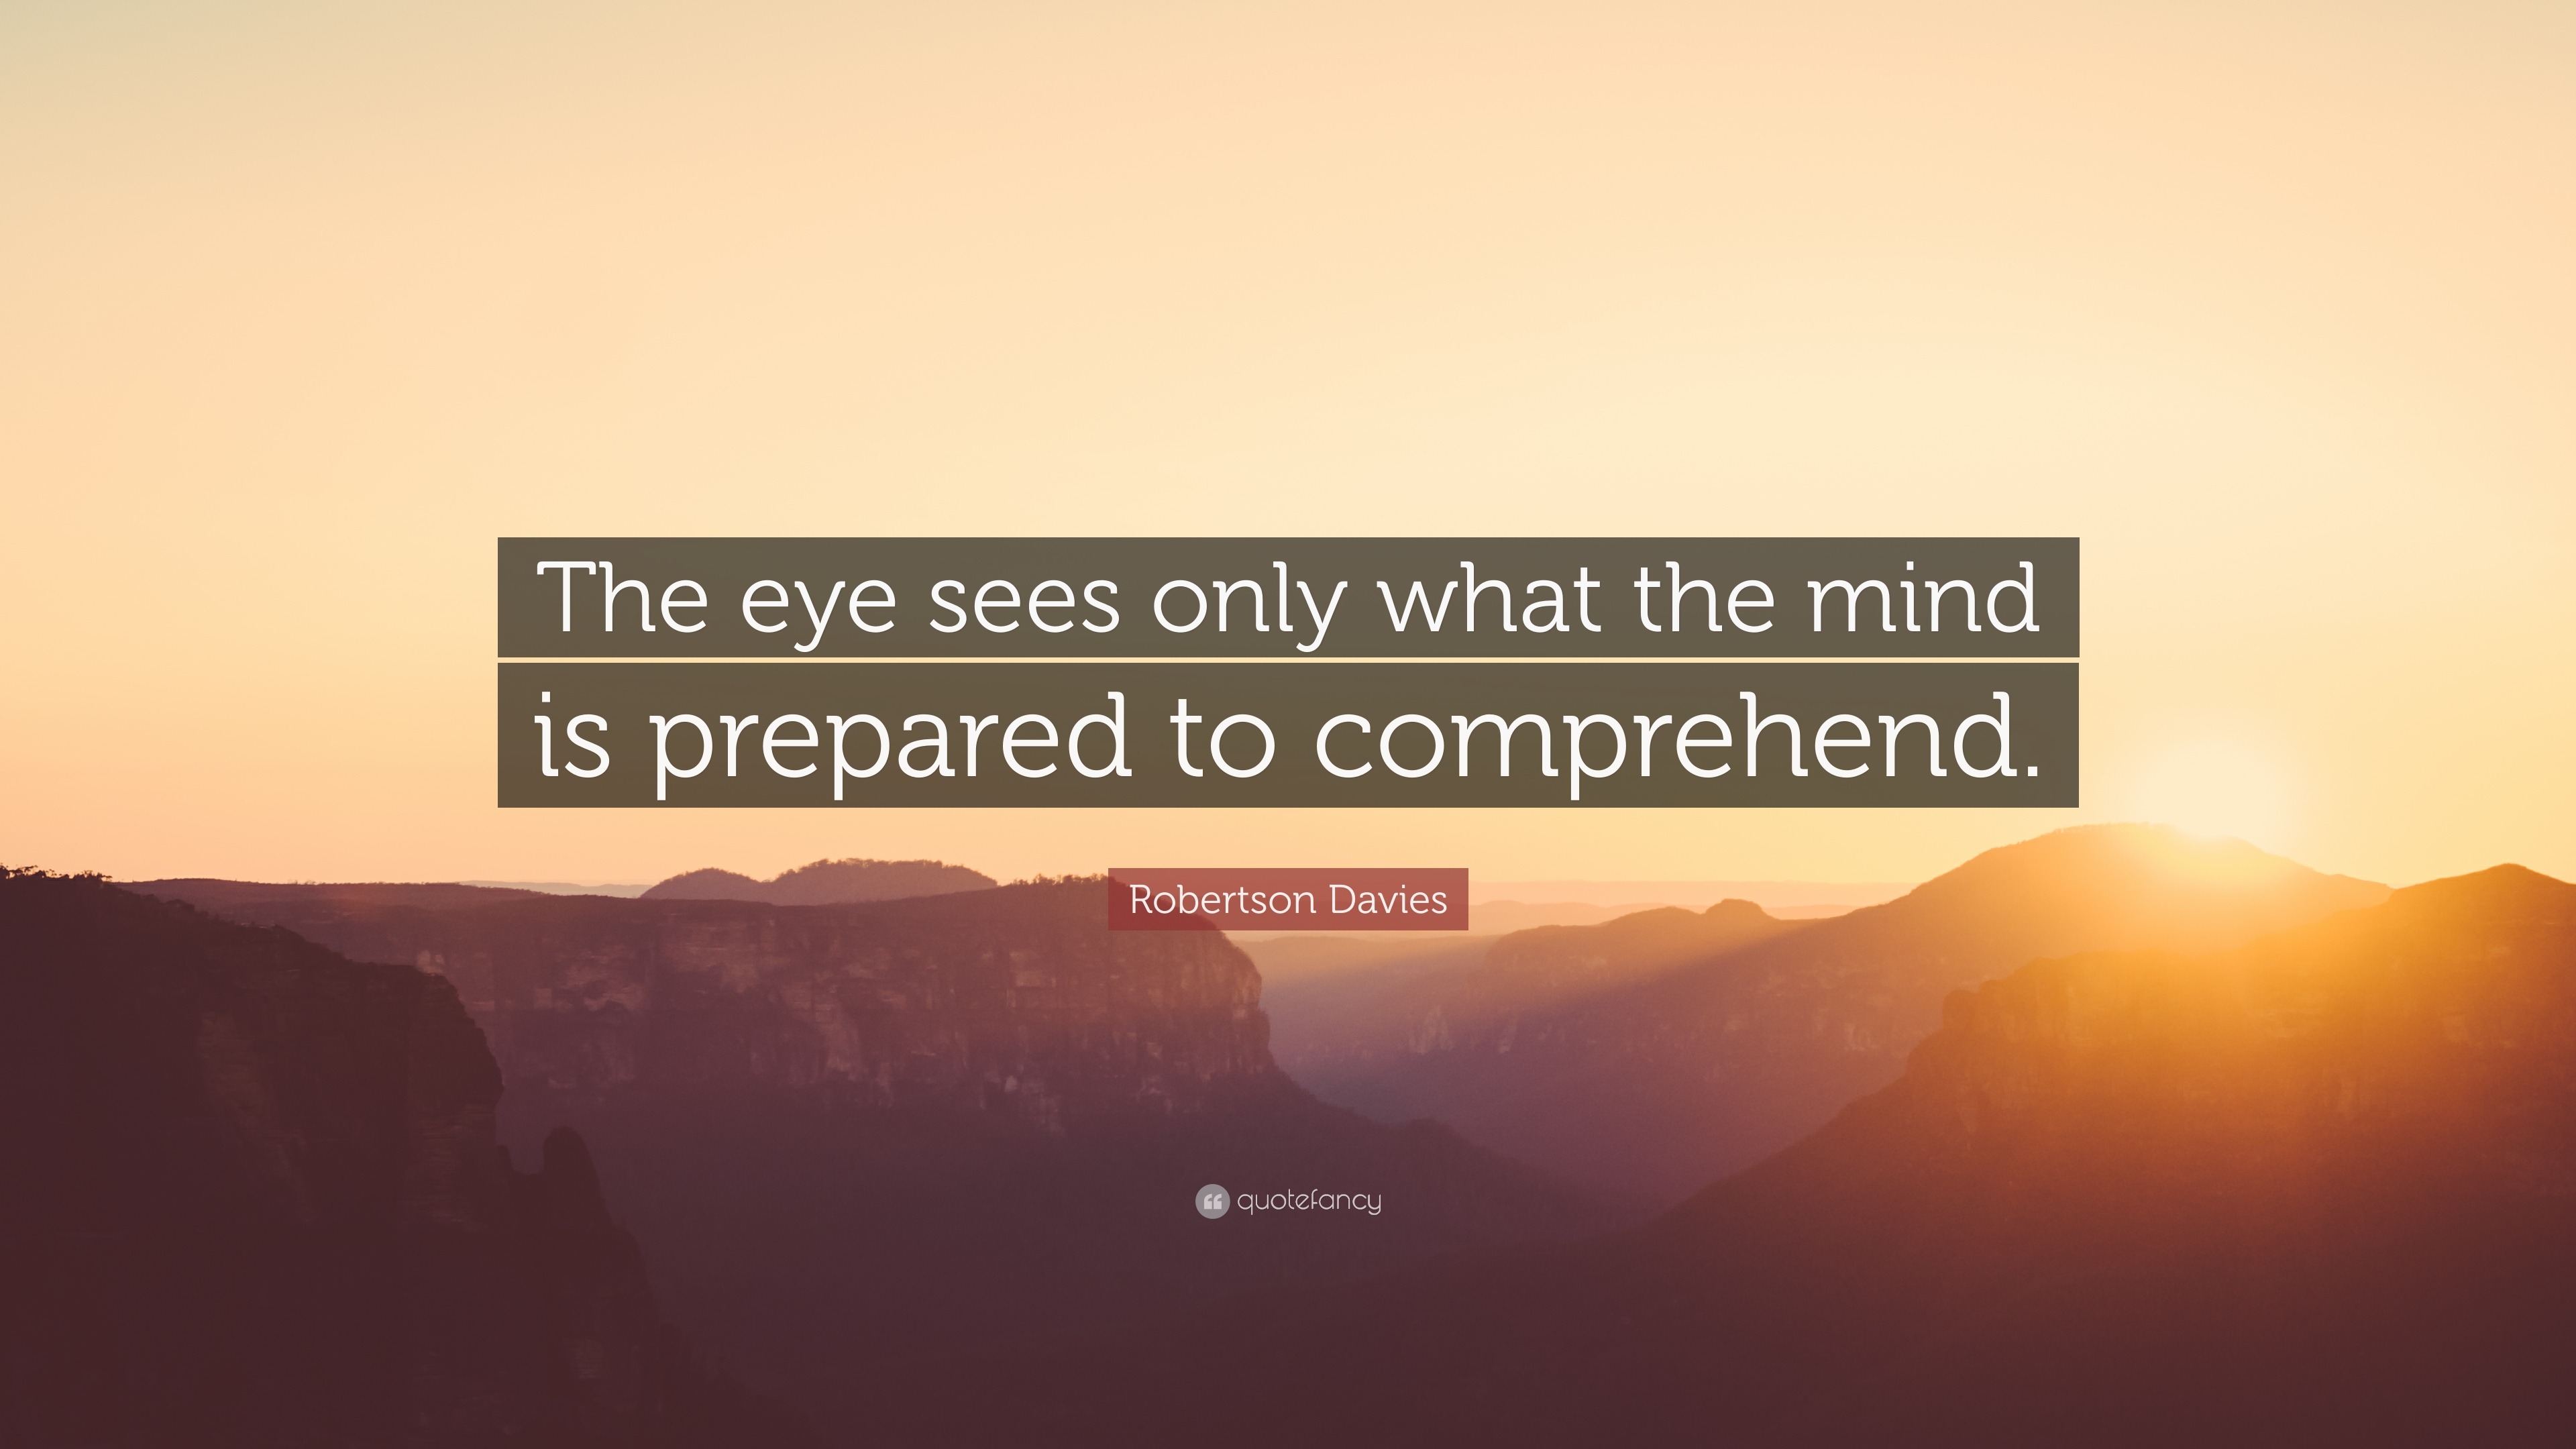 Robertson Davies Quote “the Eye Sees Only What The Mind